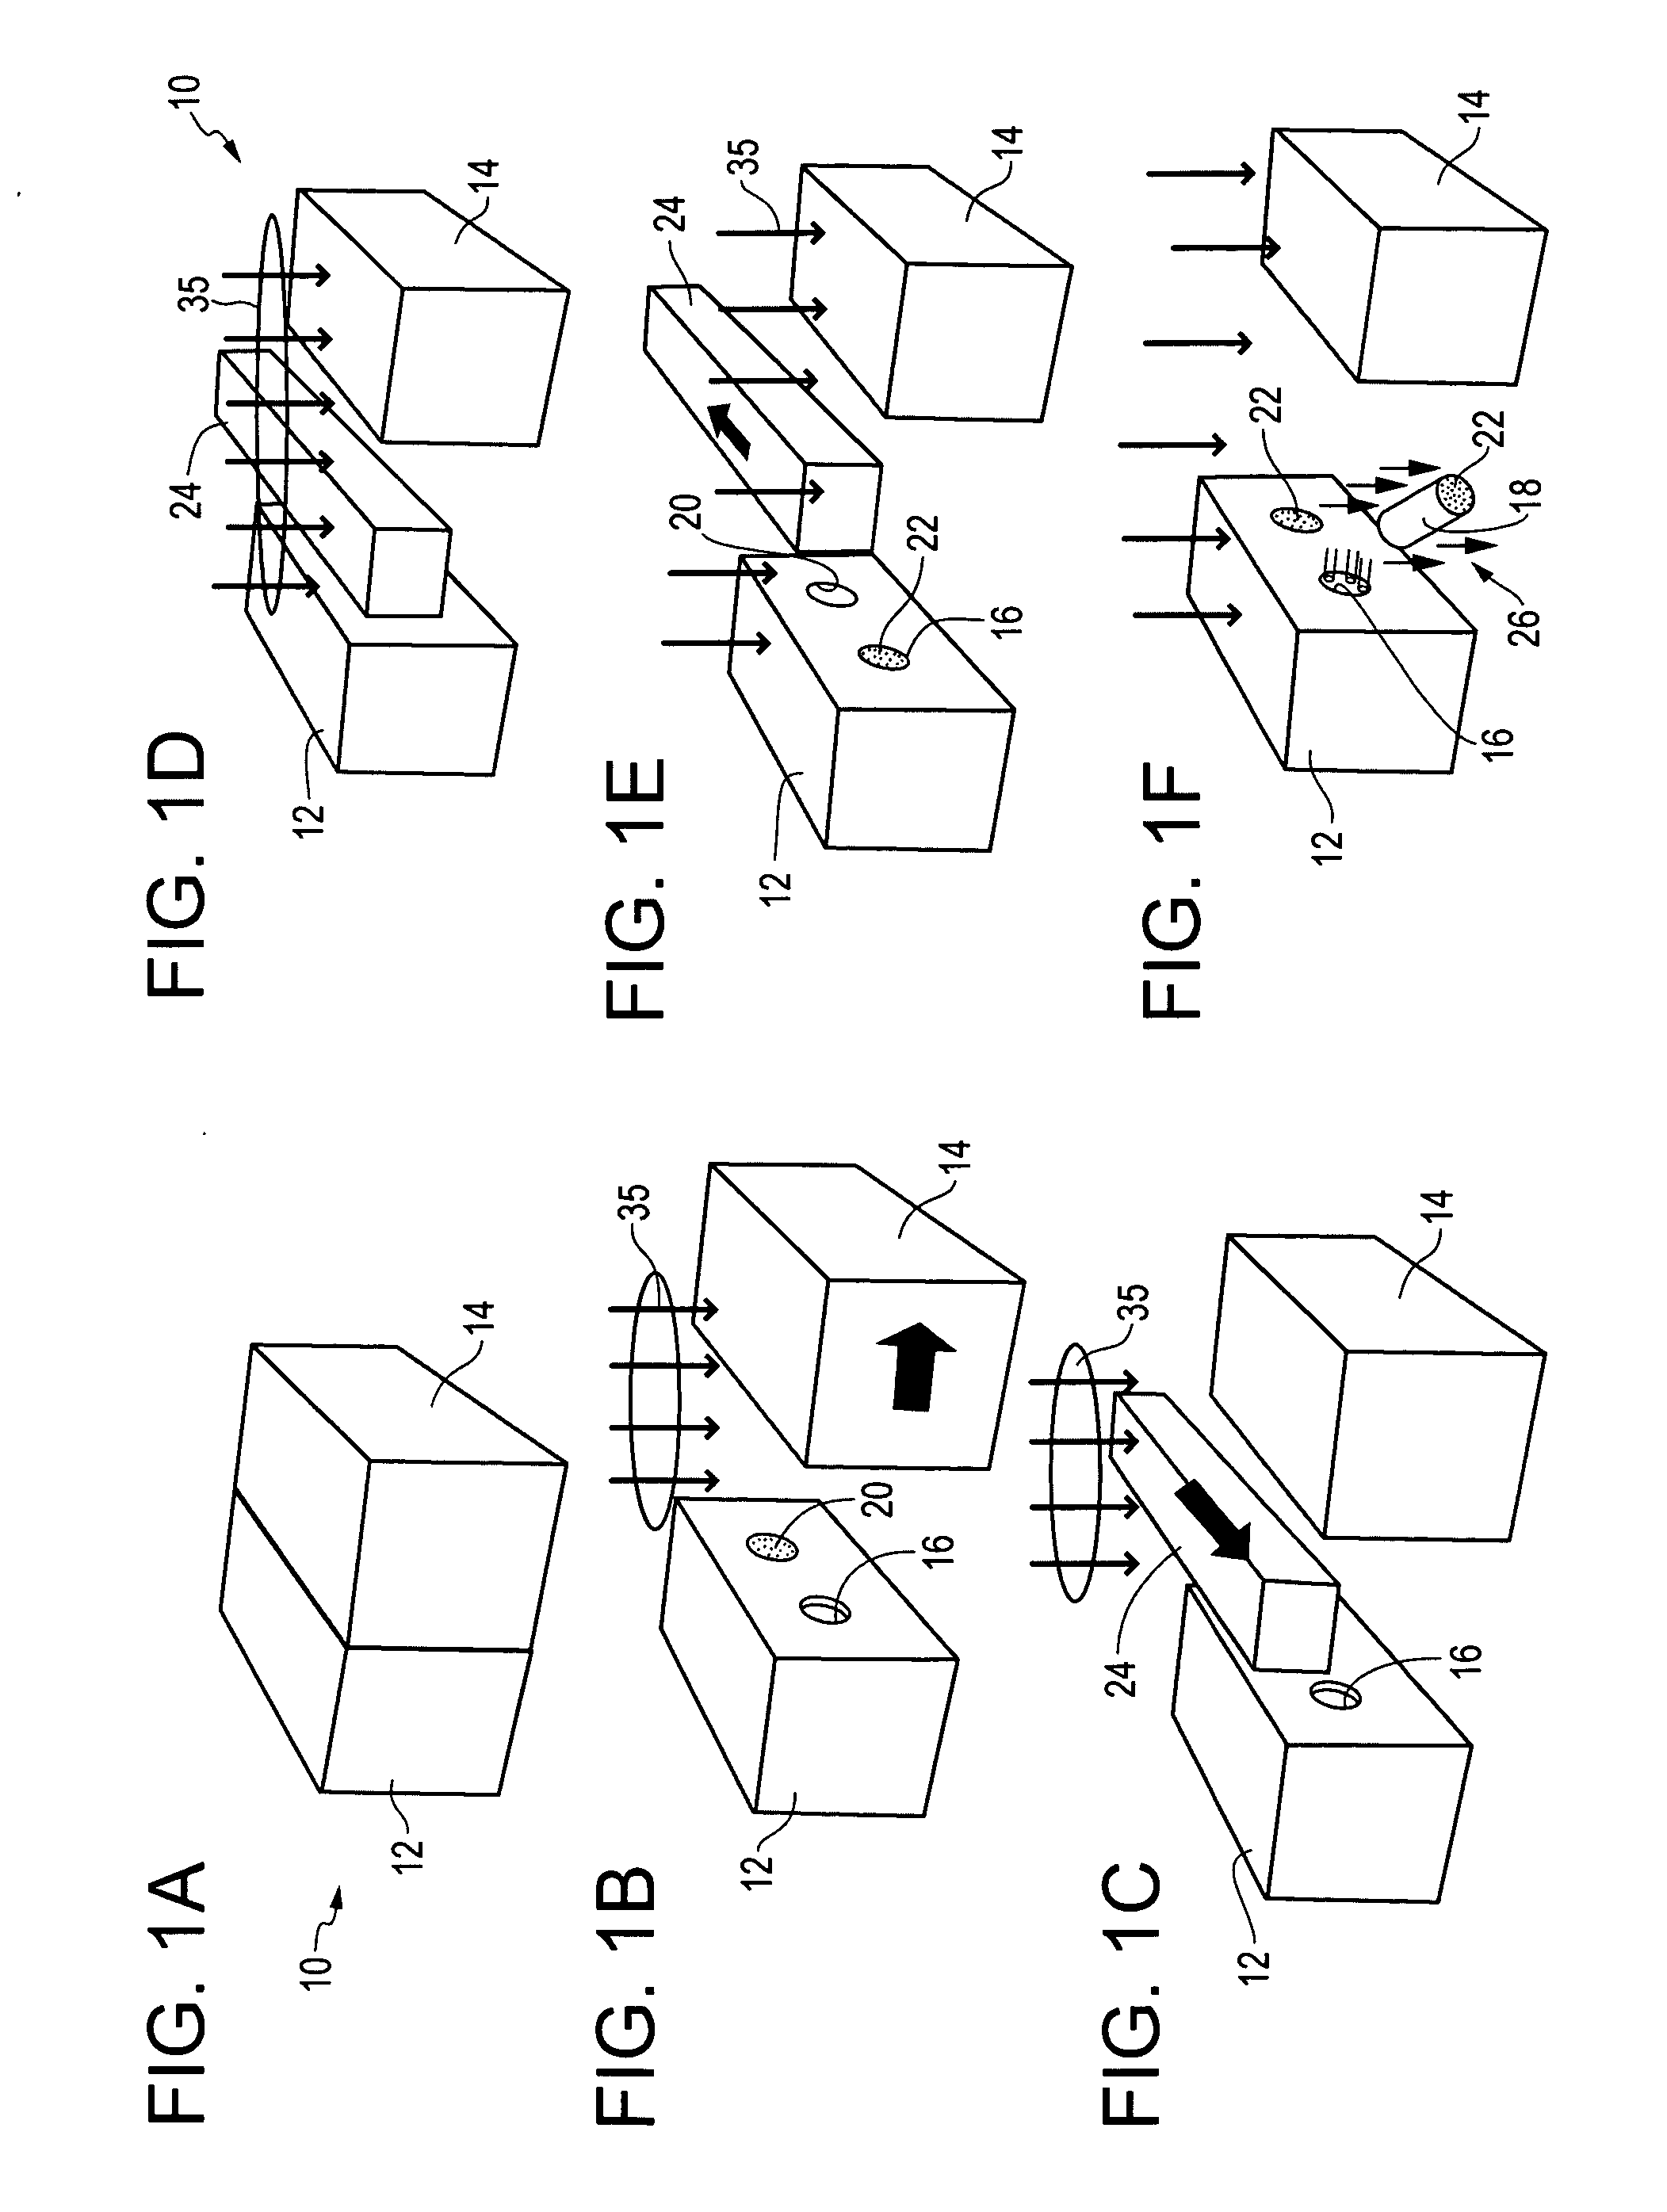 Apparatus for molding and assembling containers with stoppers and filling same